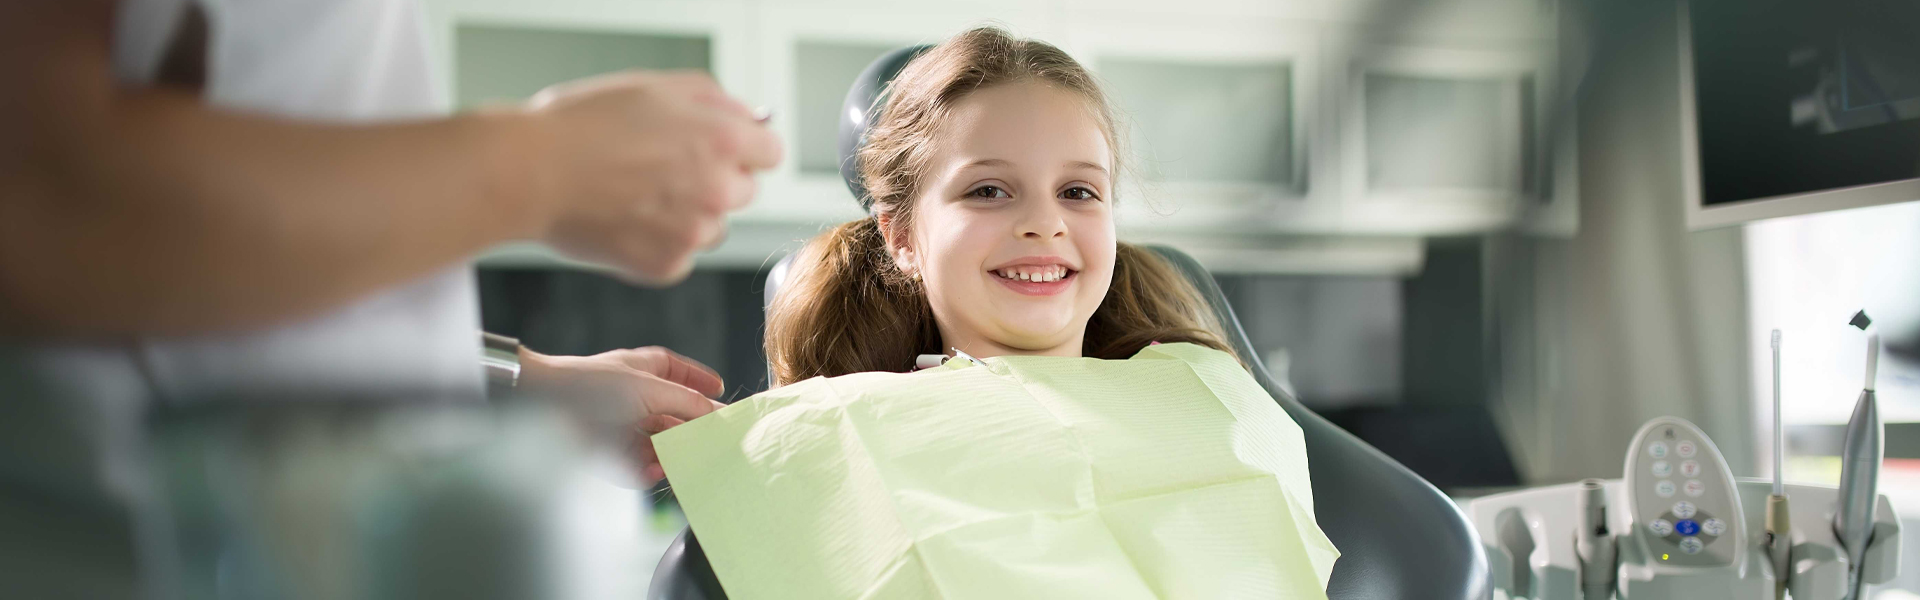 Preventive Care with Dental Exams and Cleaning Incredibly Essential for Children